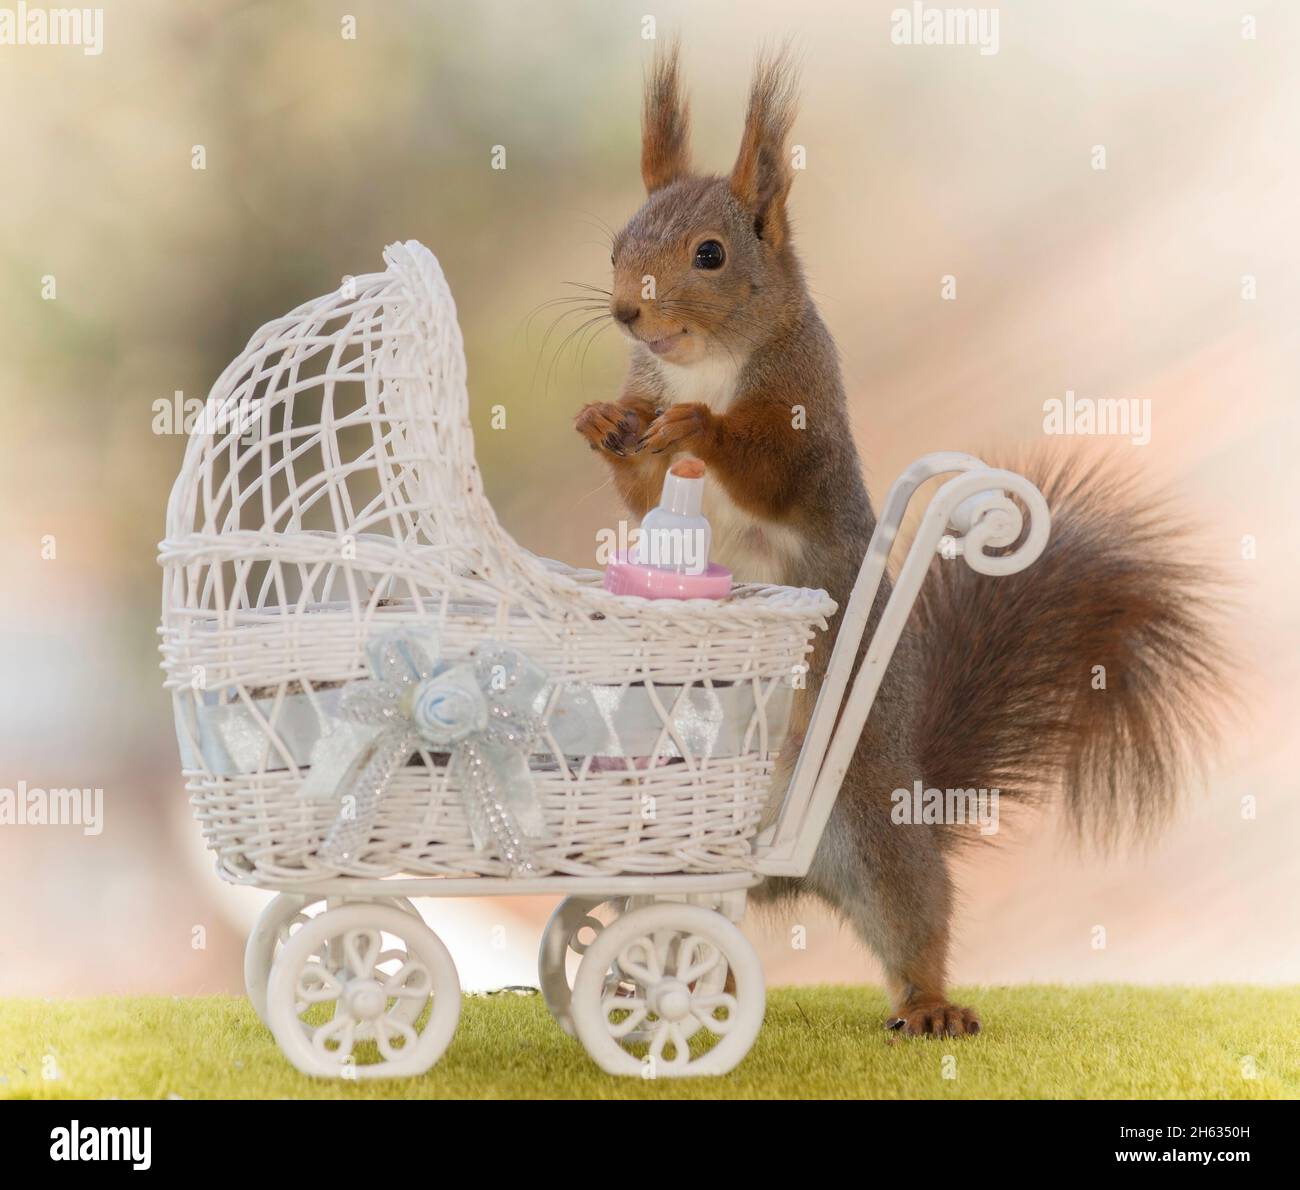 red squirrel holding a pram Stock Photo